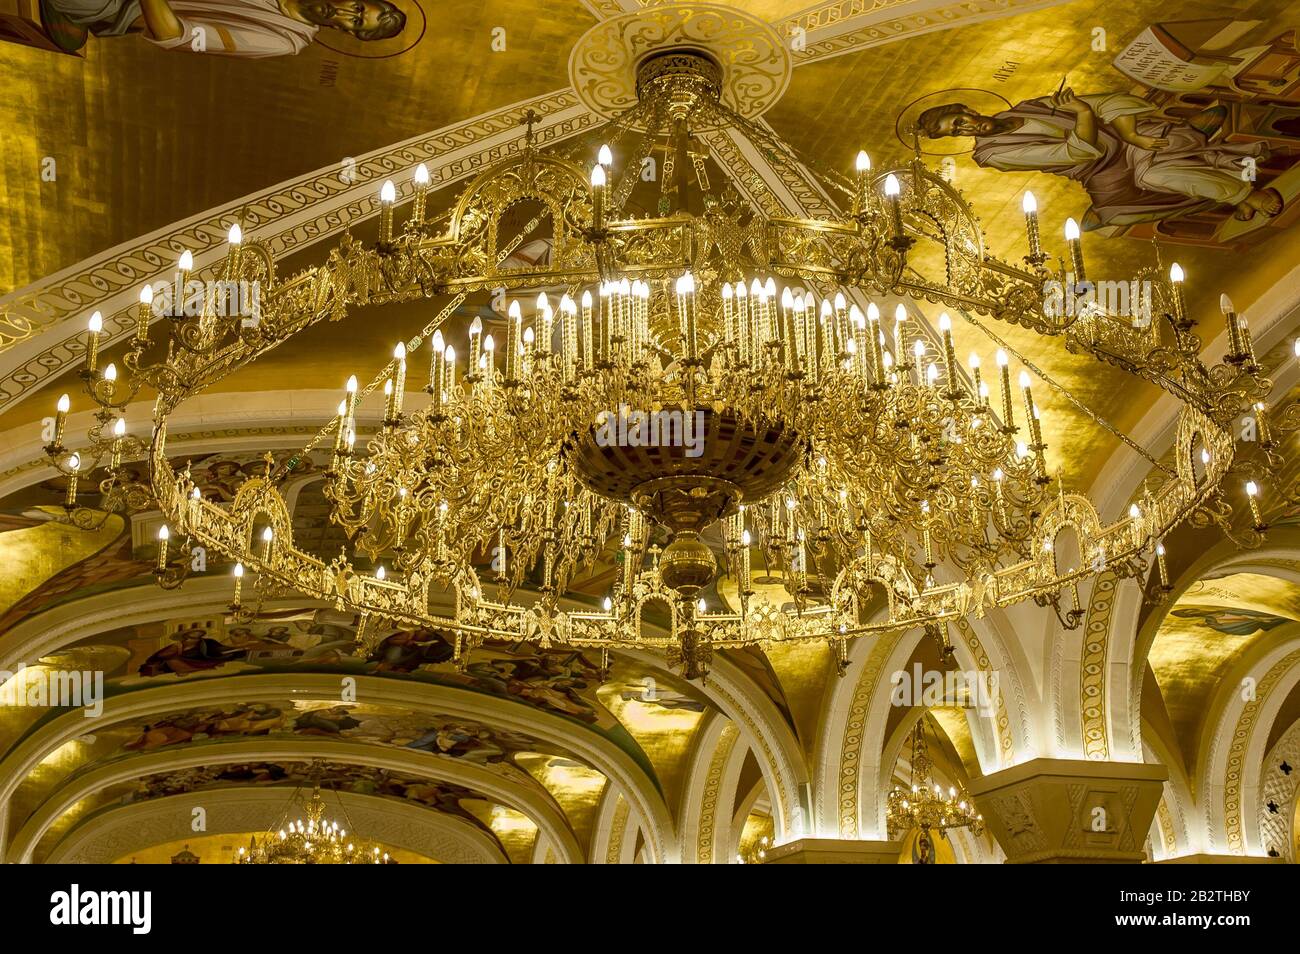 Belgrade, Serbia - February 27, 2020: a golden chandelier with frescoes and arches in the crypt of the Orthodox church Saint Sava in Belgrade, Serbia Stock Photo